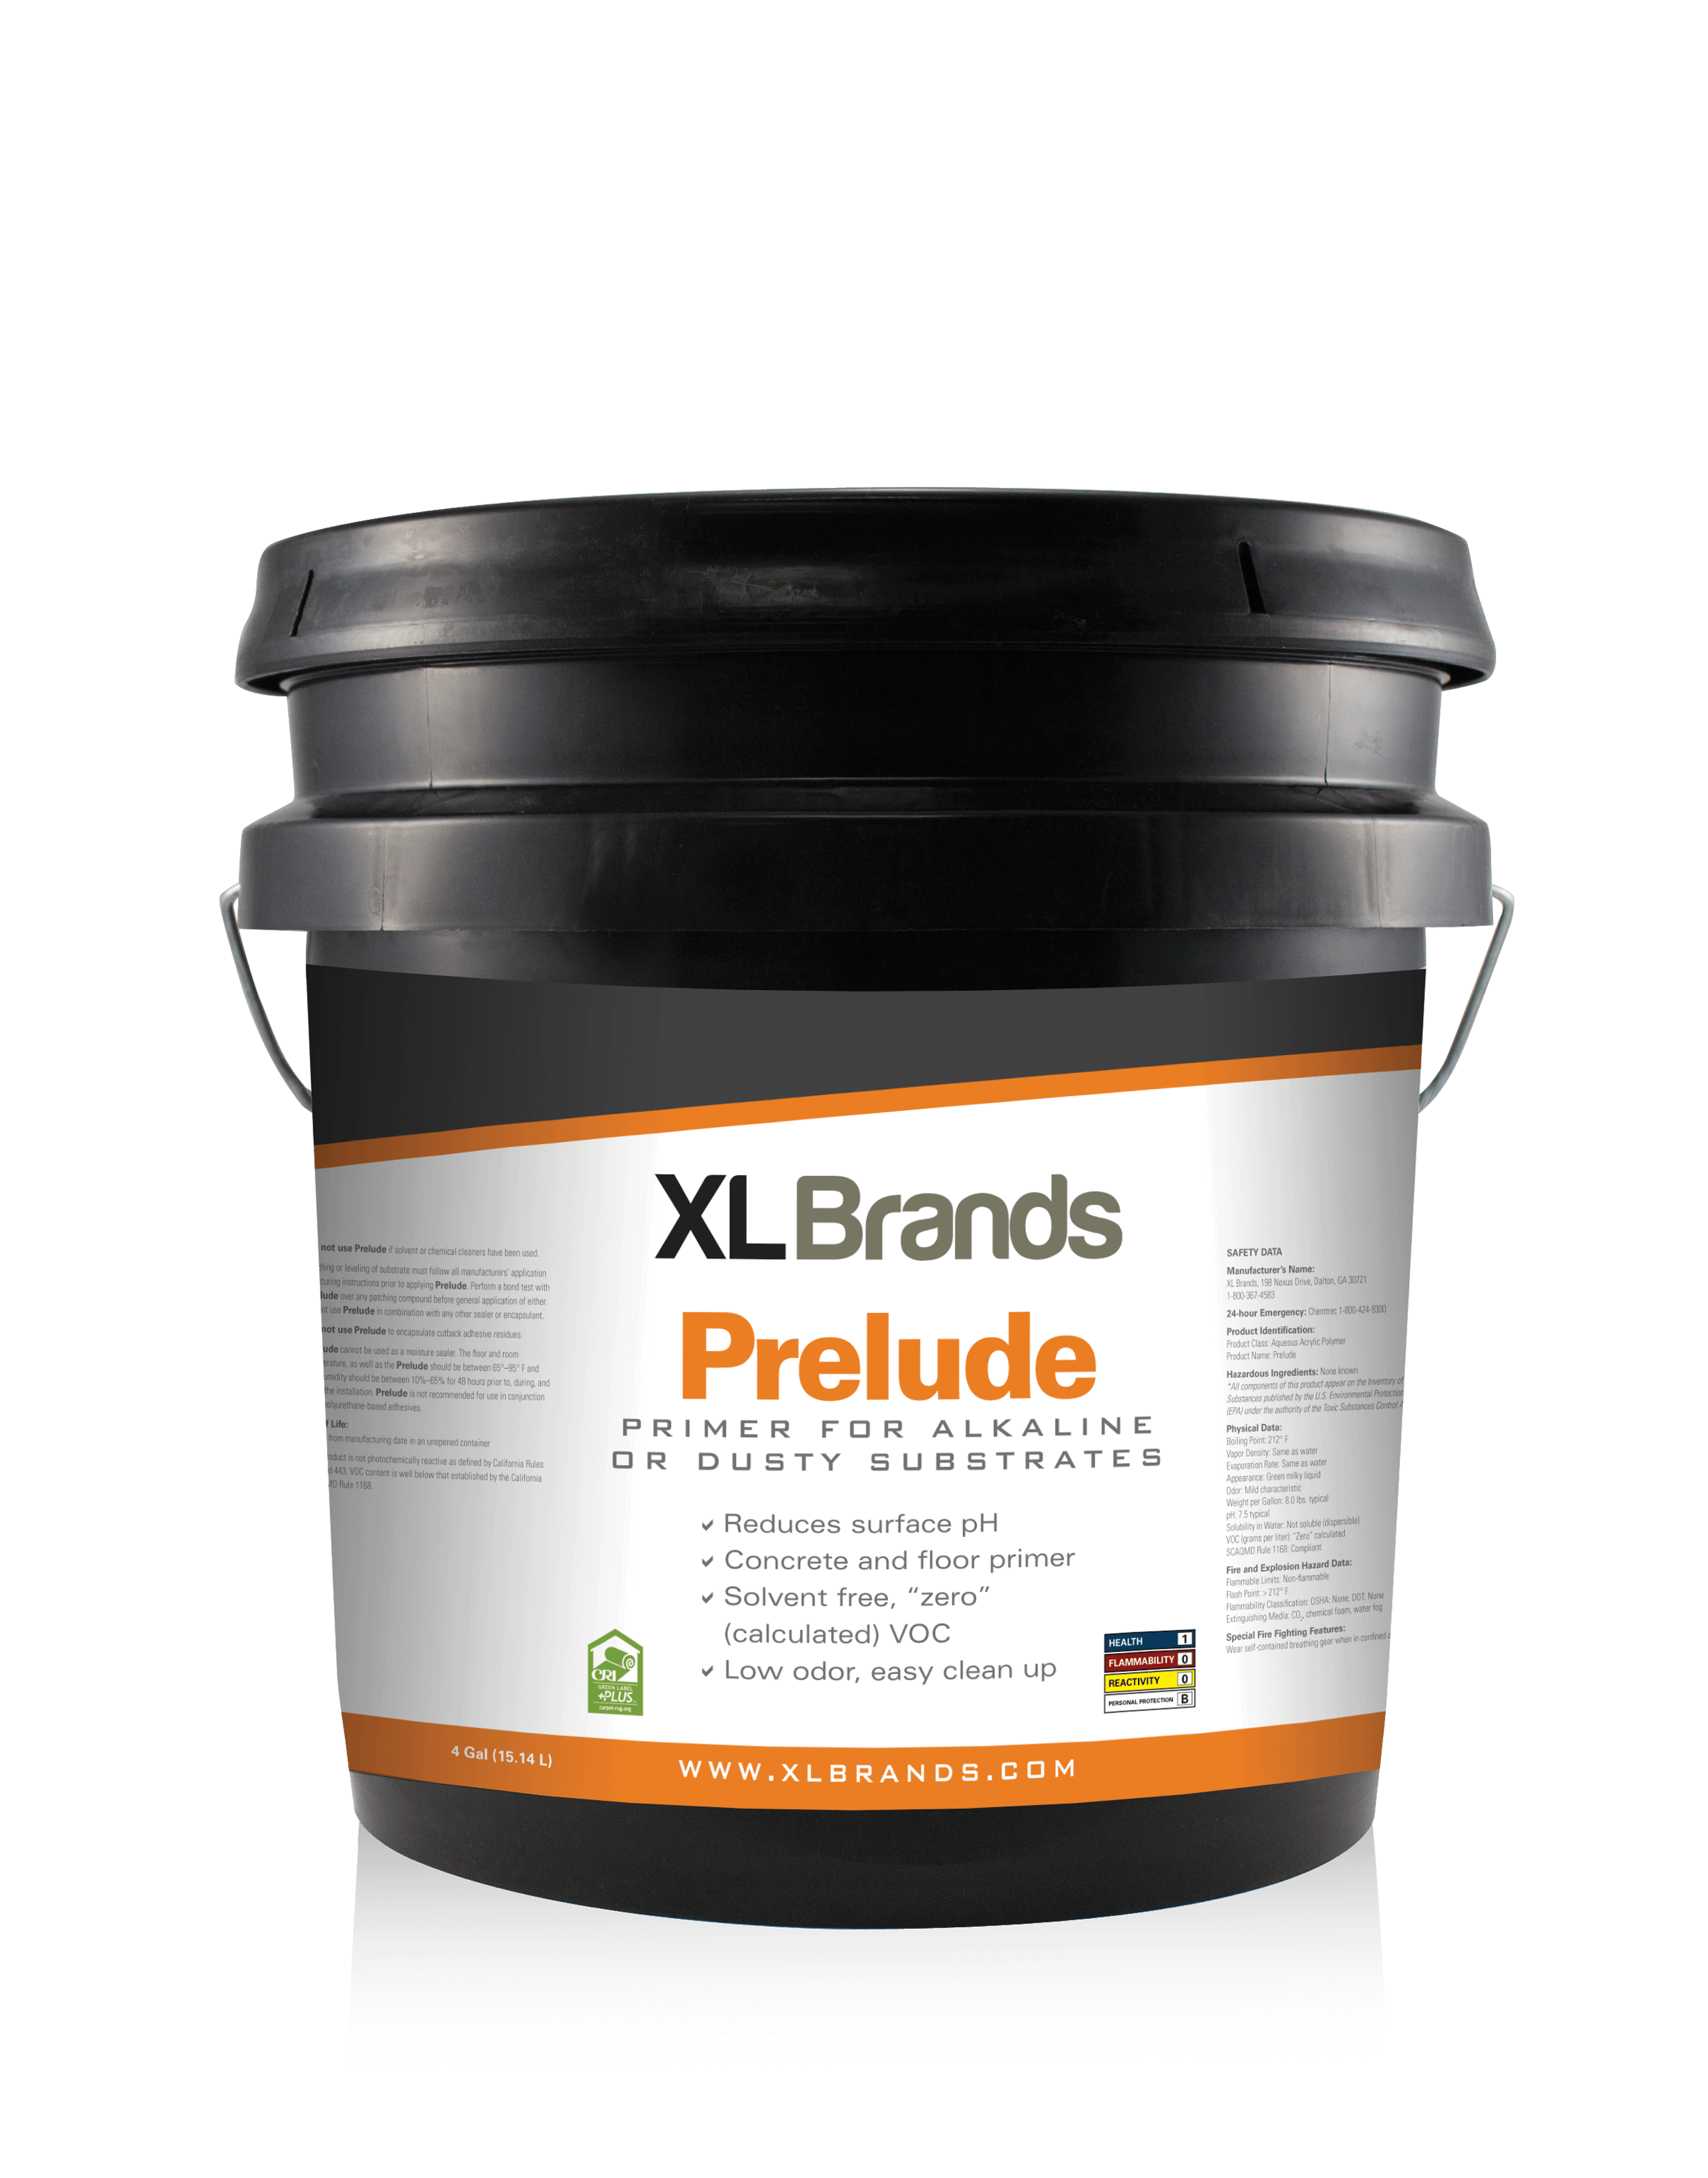 XL Brands Prelude Primer for Alkaline or Porous Substrates - 4 Gal Pail